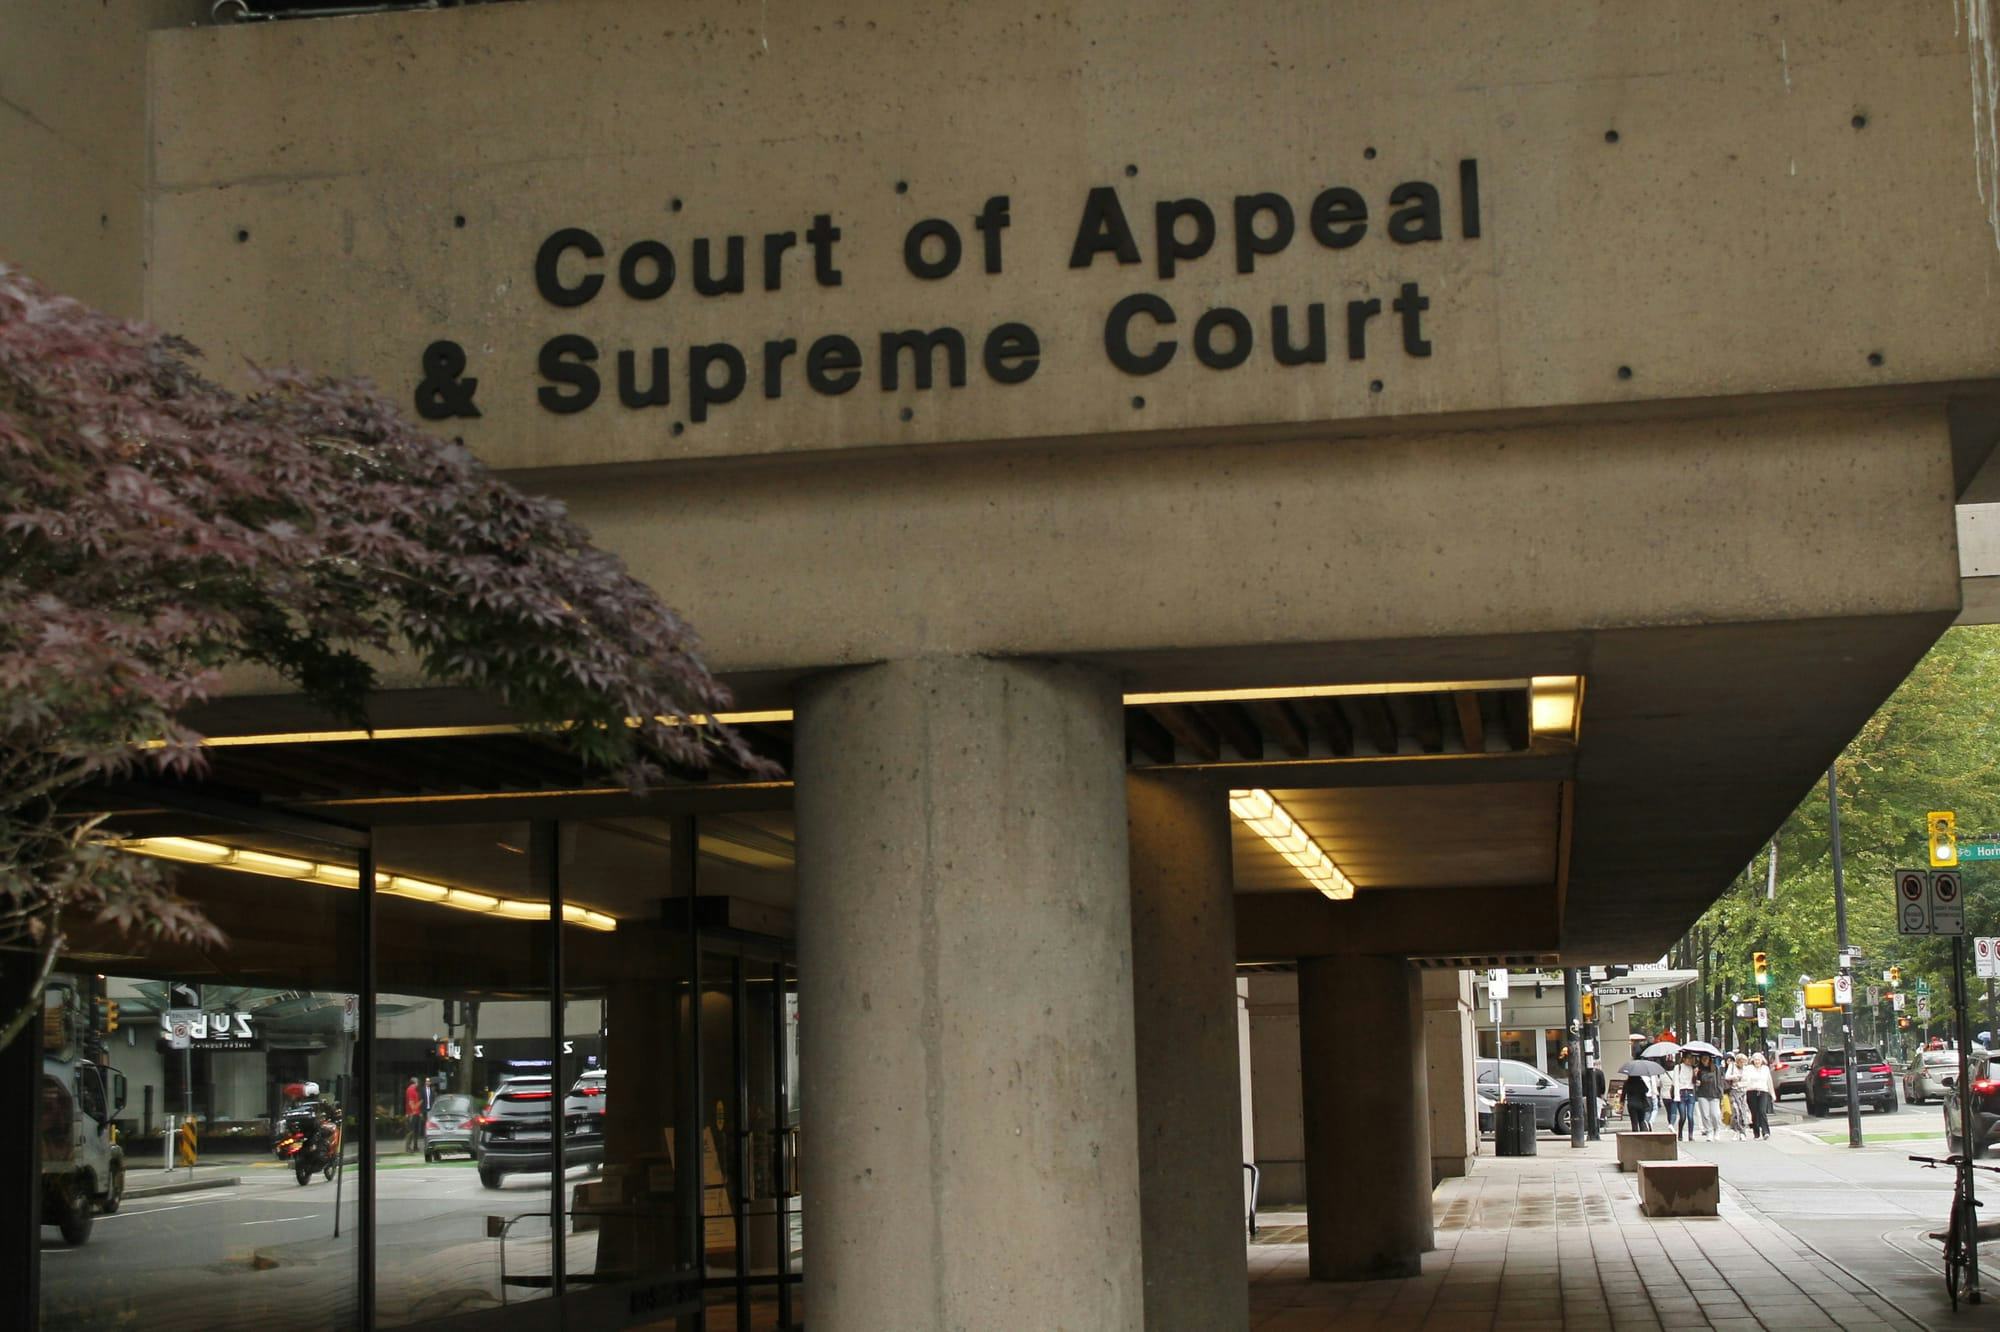 The Court of Appeal and Supreme Court of British Columbia, a large concrete structure in downtown Vancouver.